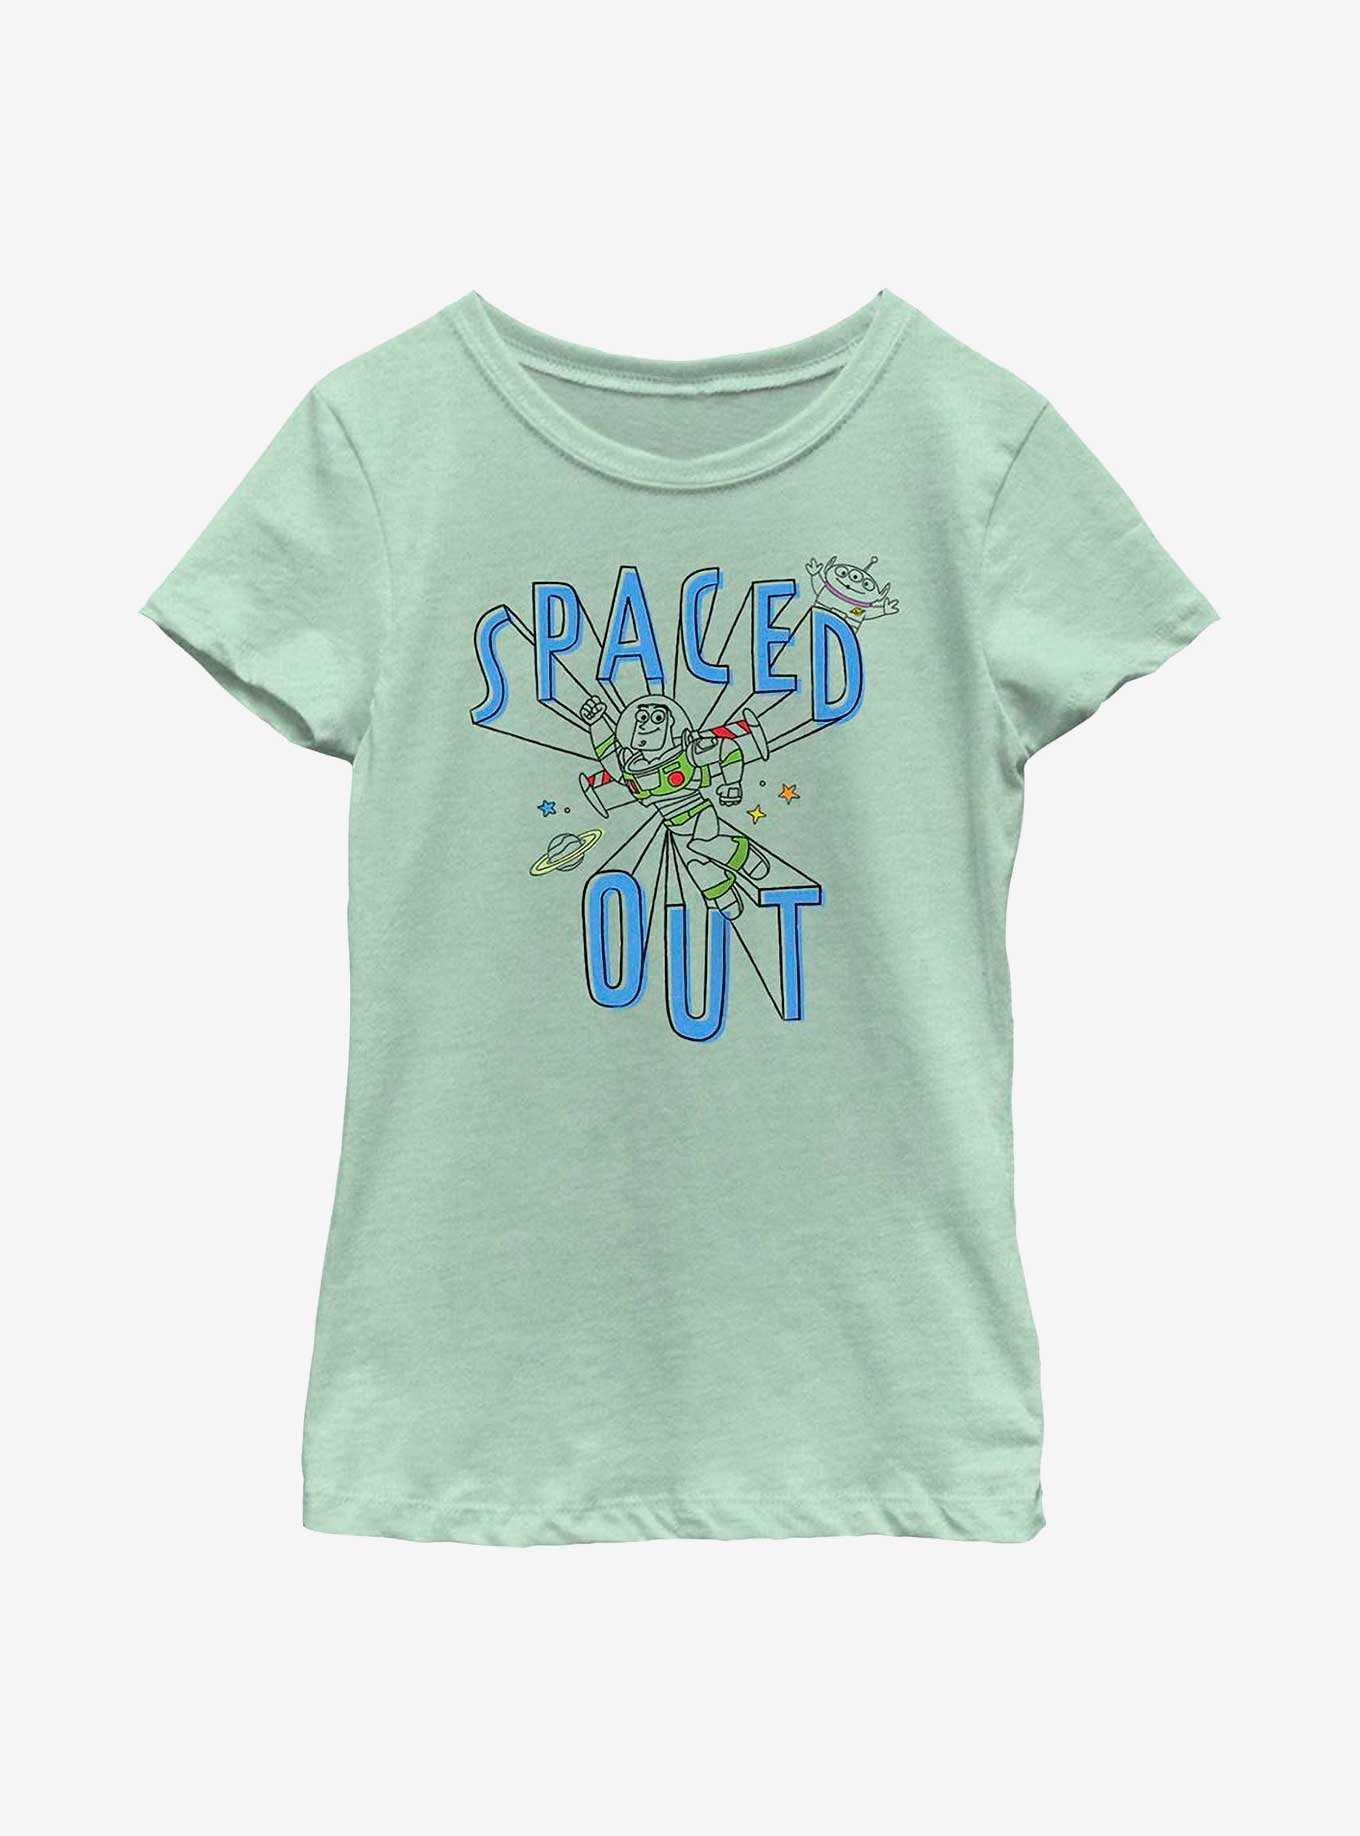 Disney Pixar Toy Story Spaced Out Youth Girls T-Shirt, , hi-res